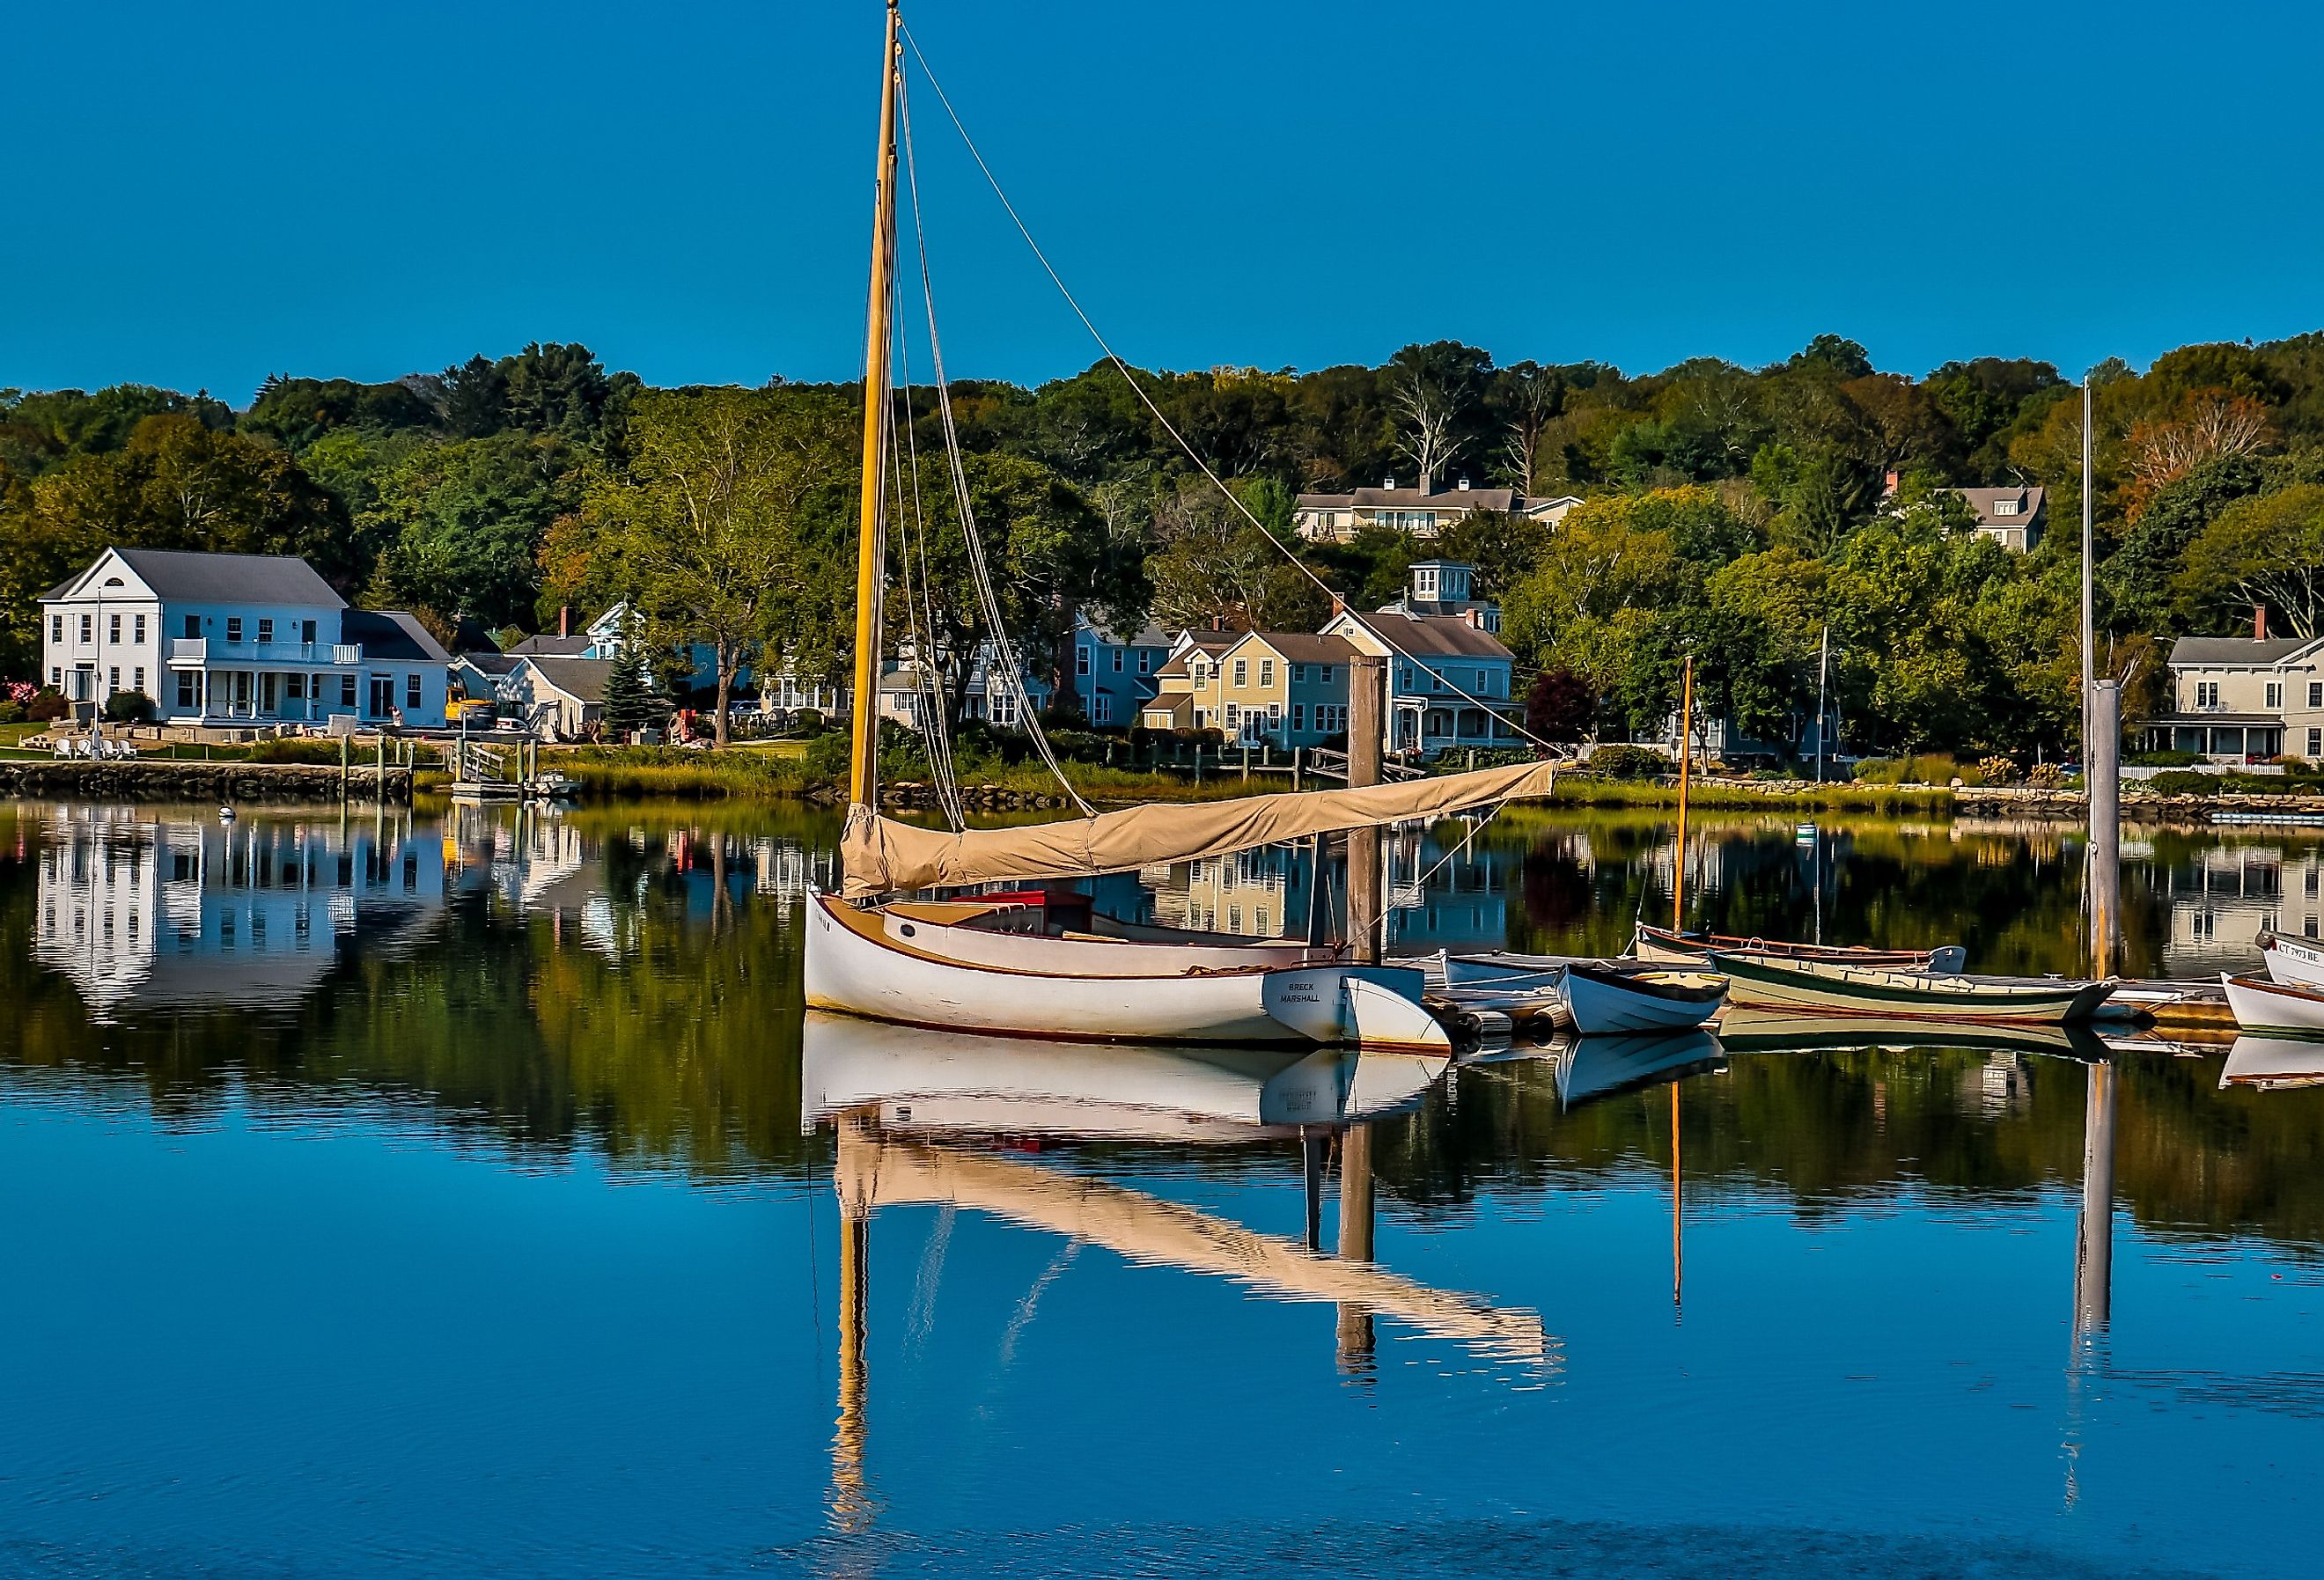 Boats in the Harbor and homes along the water in Mystic Seaport, Connecticut.